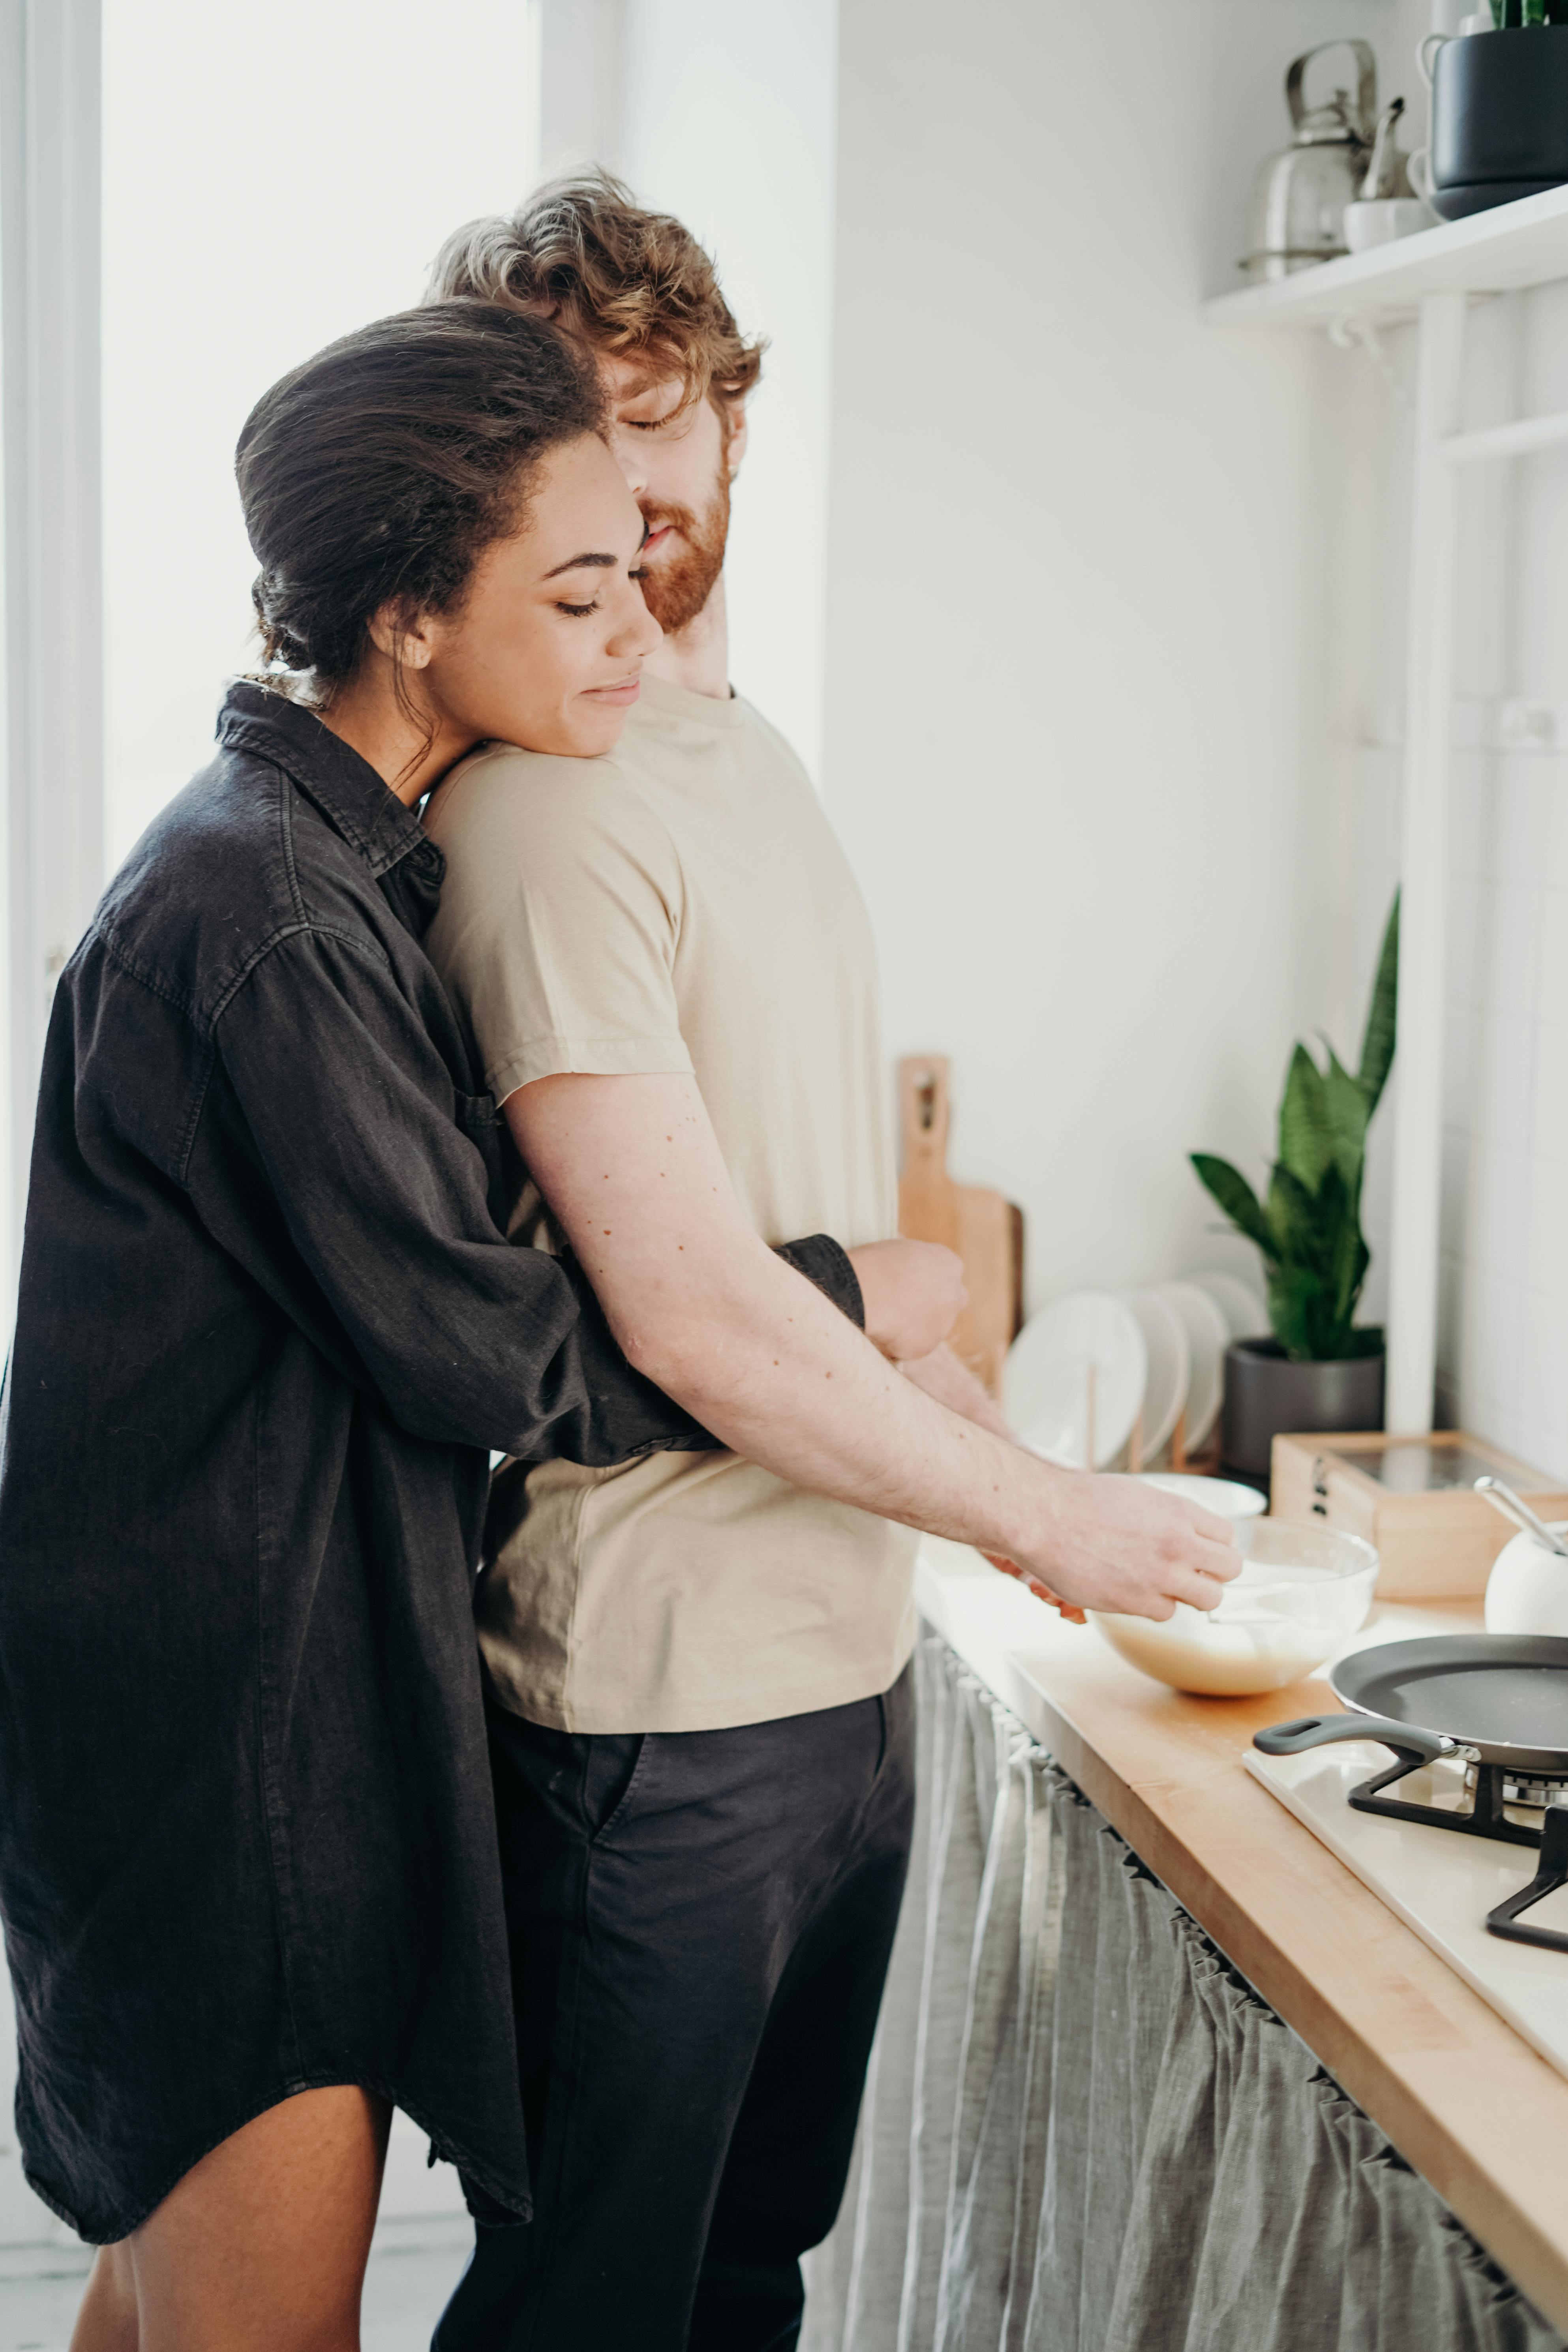 Woman hugging her man in the kitchen. | Photo: Pexels